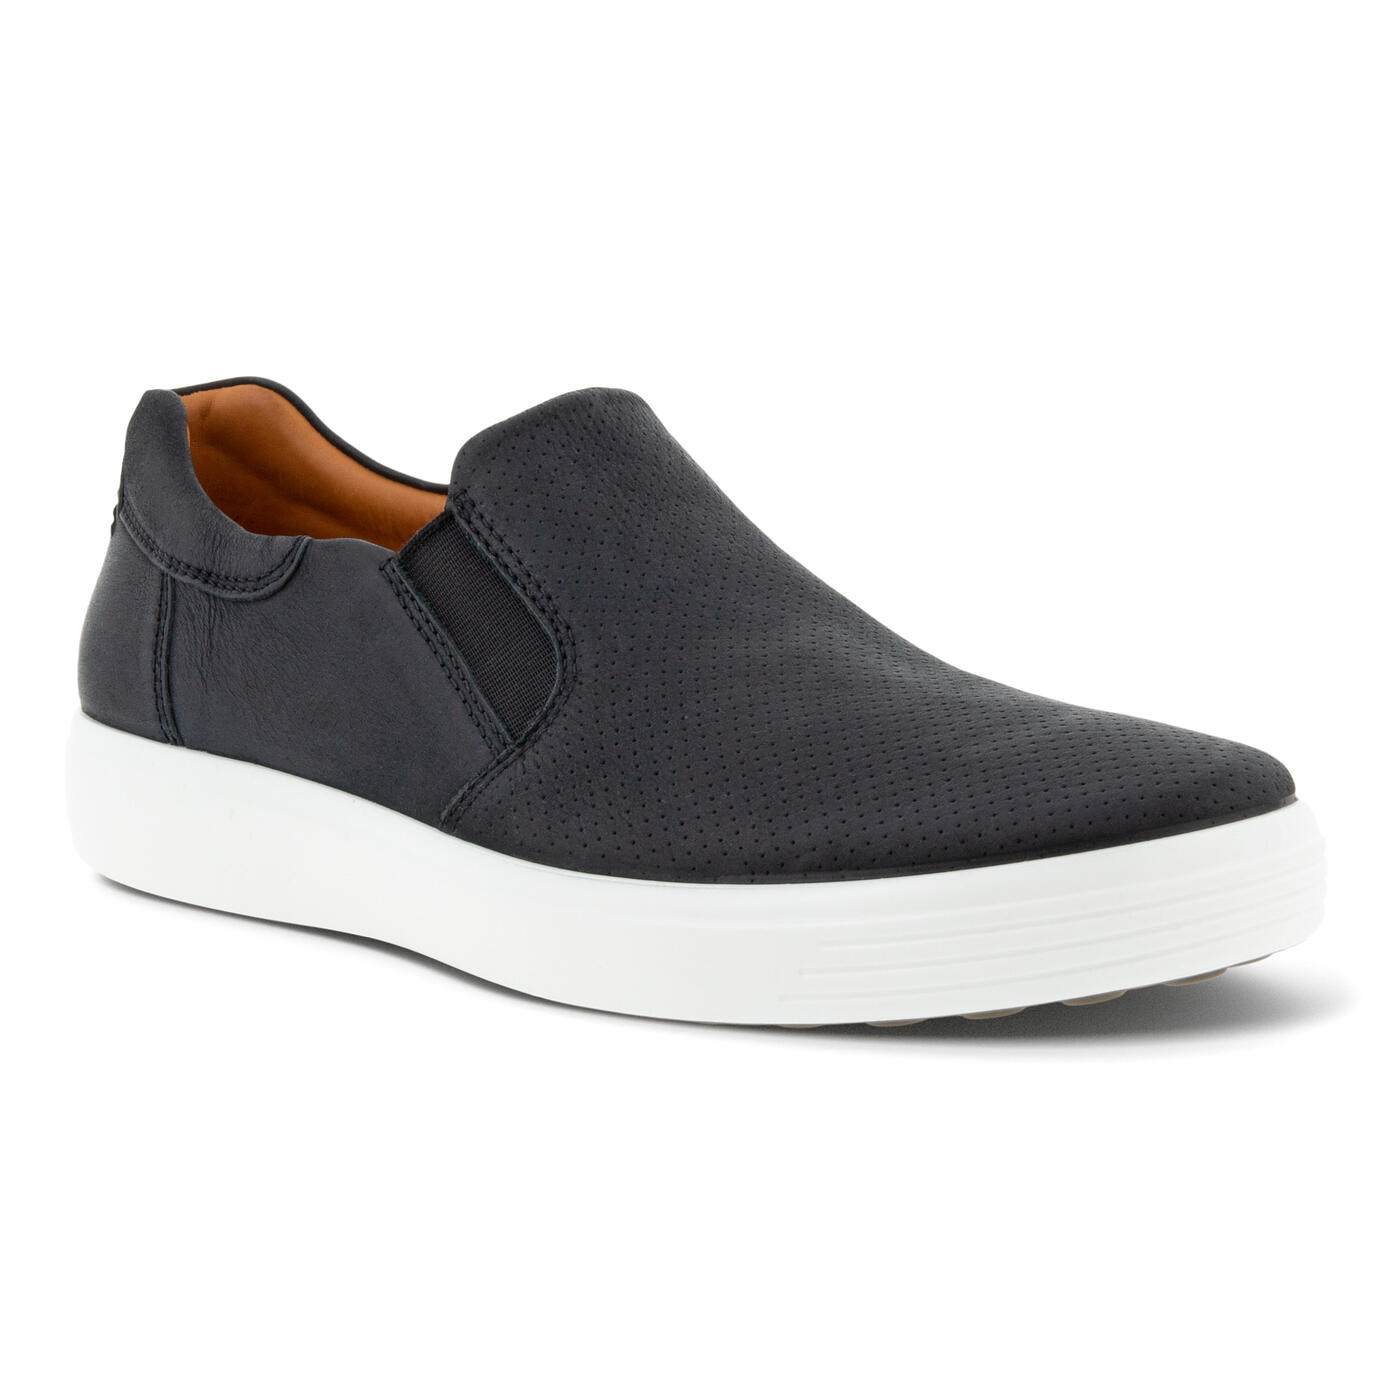 Men's Soft 7 Slip On Sneakers | ECCO® Shoes